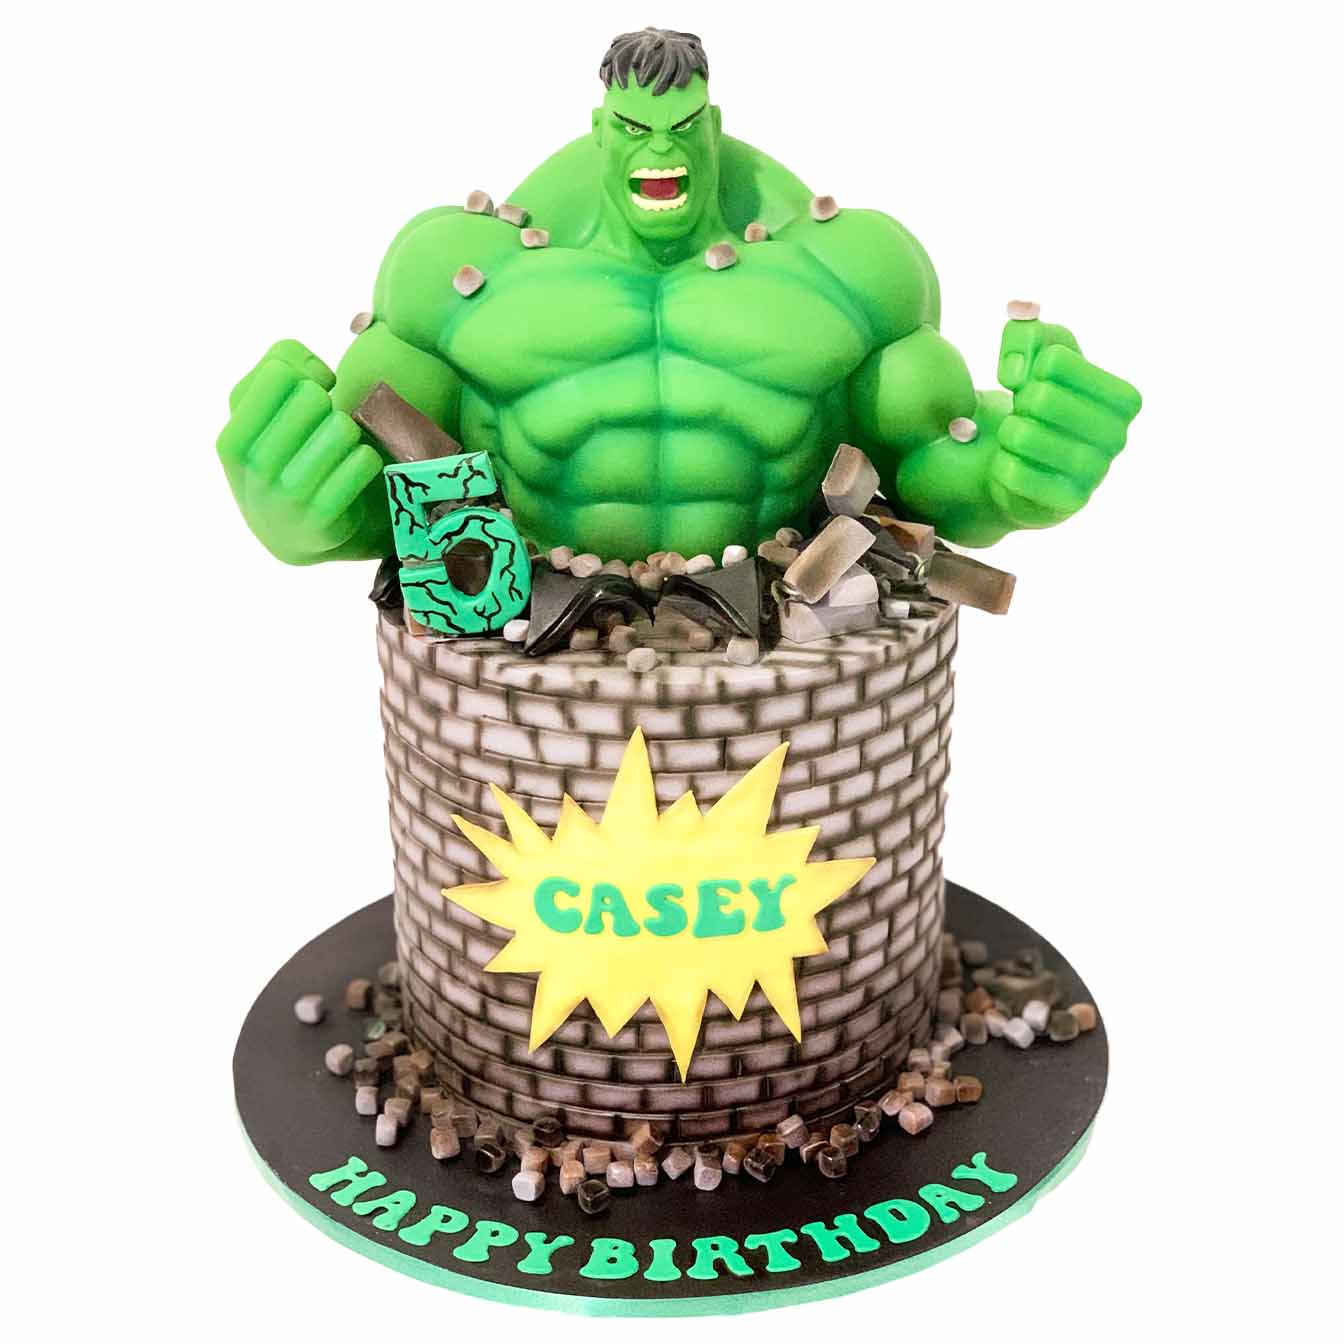 Hulk Smash Money Box Cake - A green fondant cake with a brick wall design, featuring a Hulk money box bursting out, scattered bricks, and the honouree's name in a cartoon explosion bubble, a thrilling centrepiece for superhero-themed celebrations.